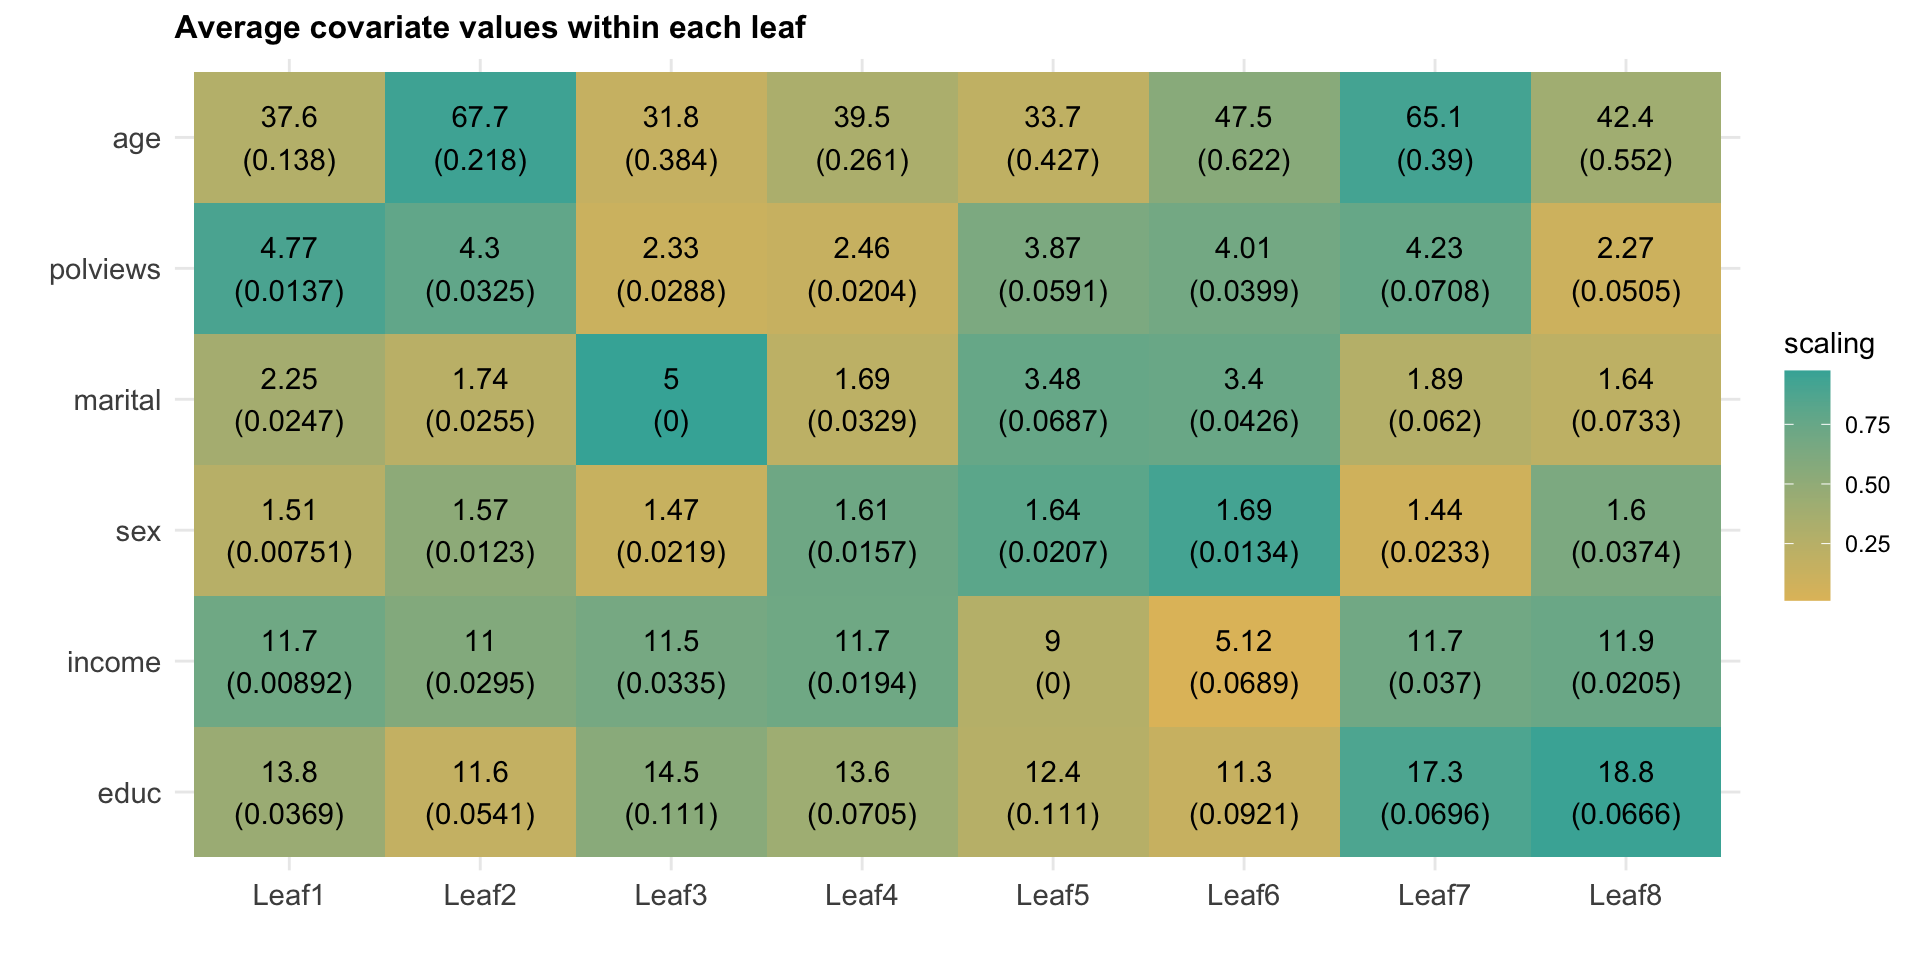 Average covariate values within each leaf